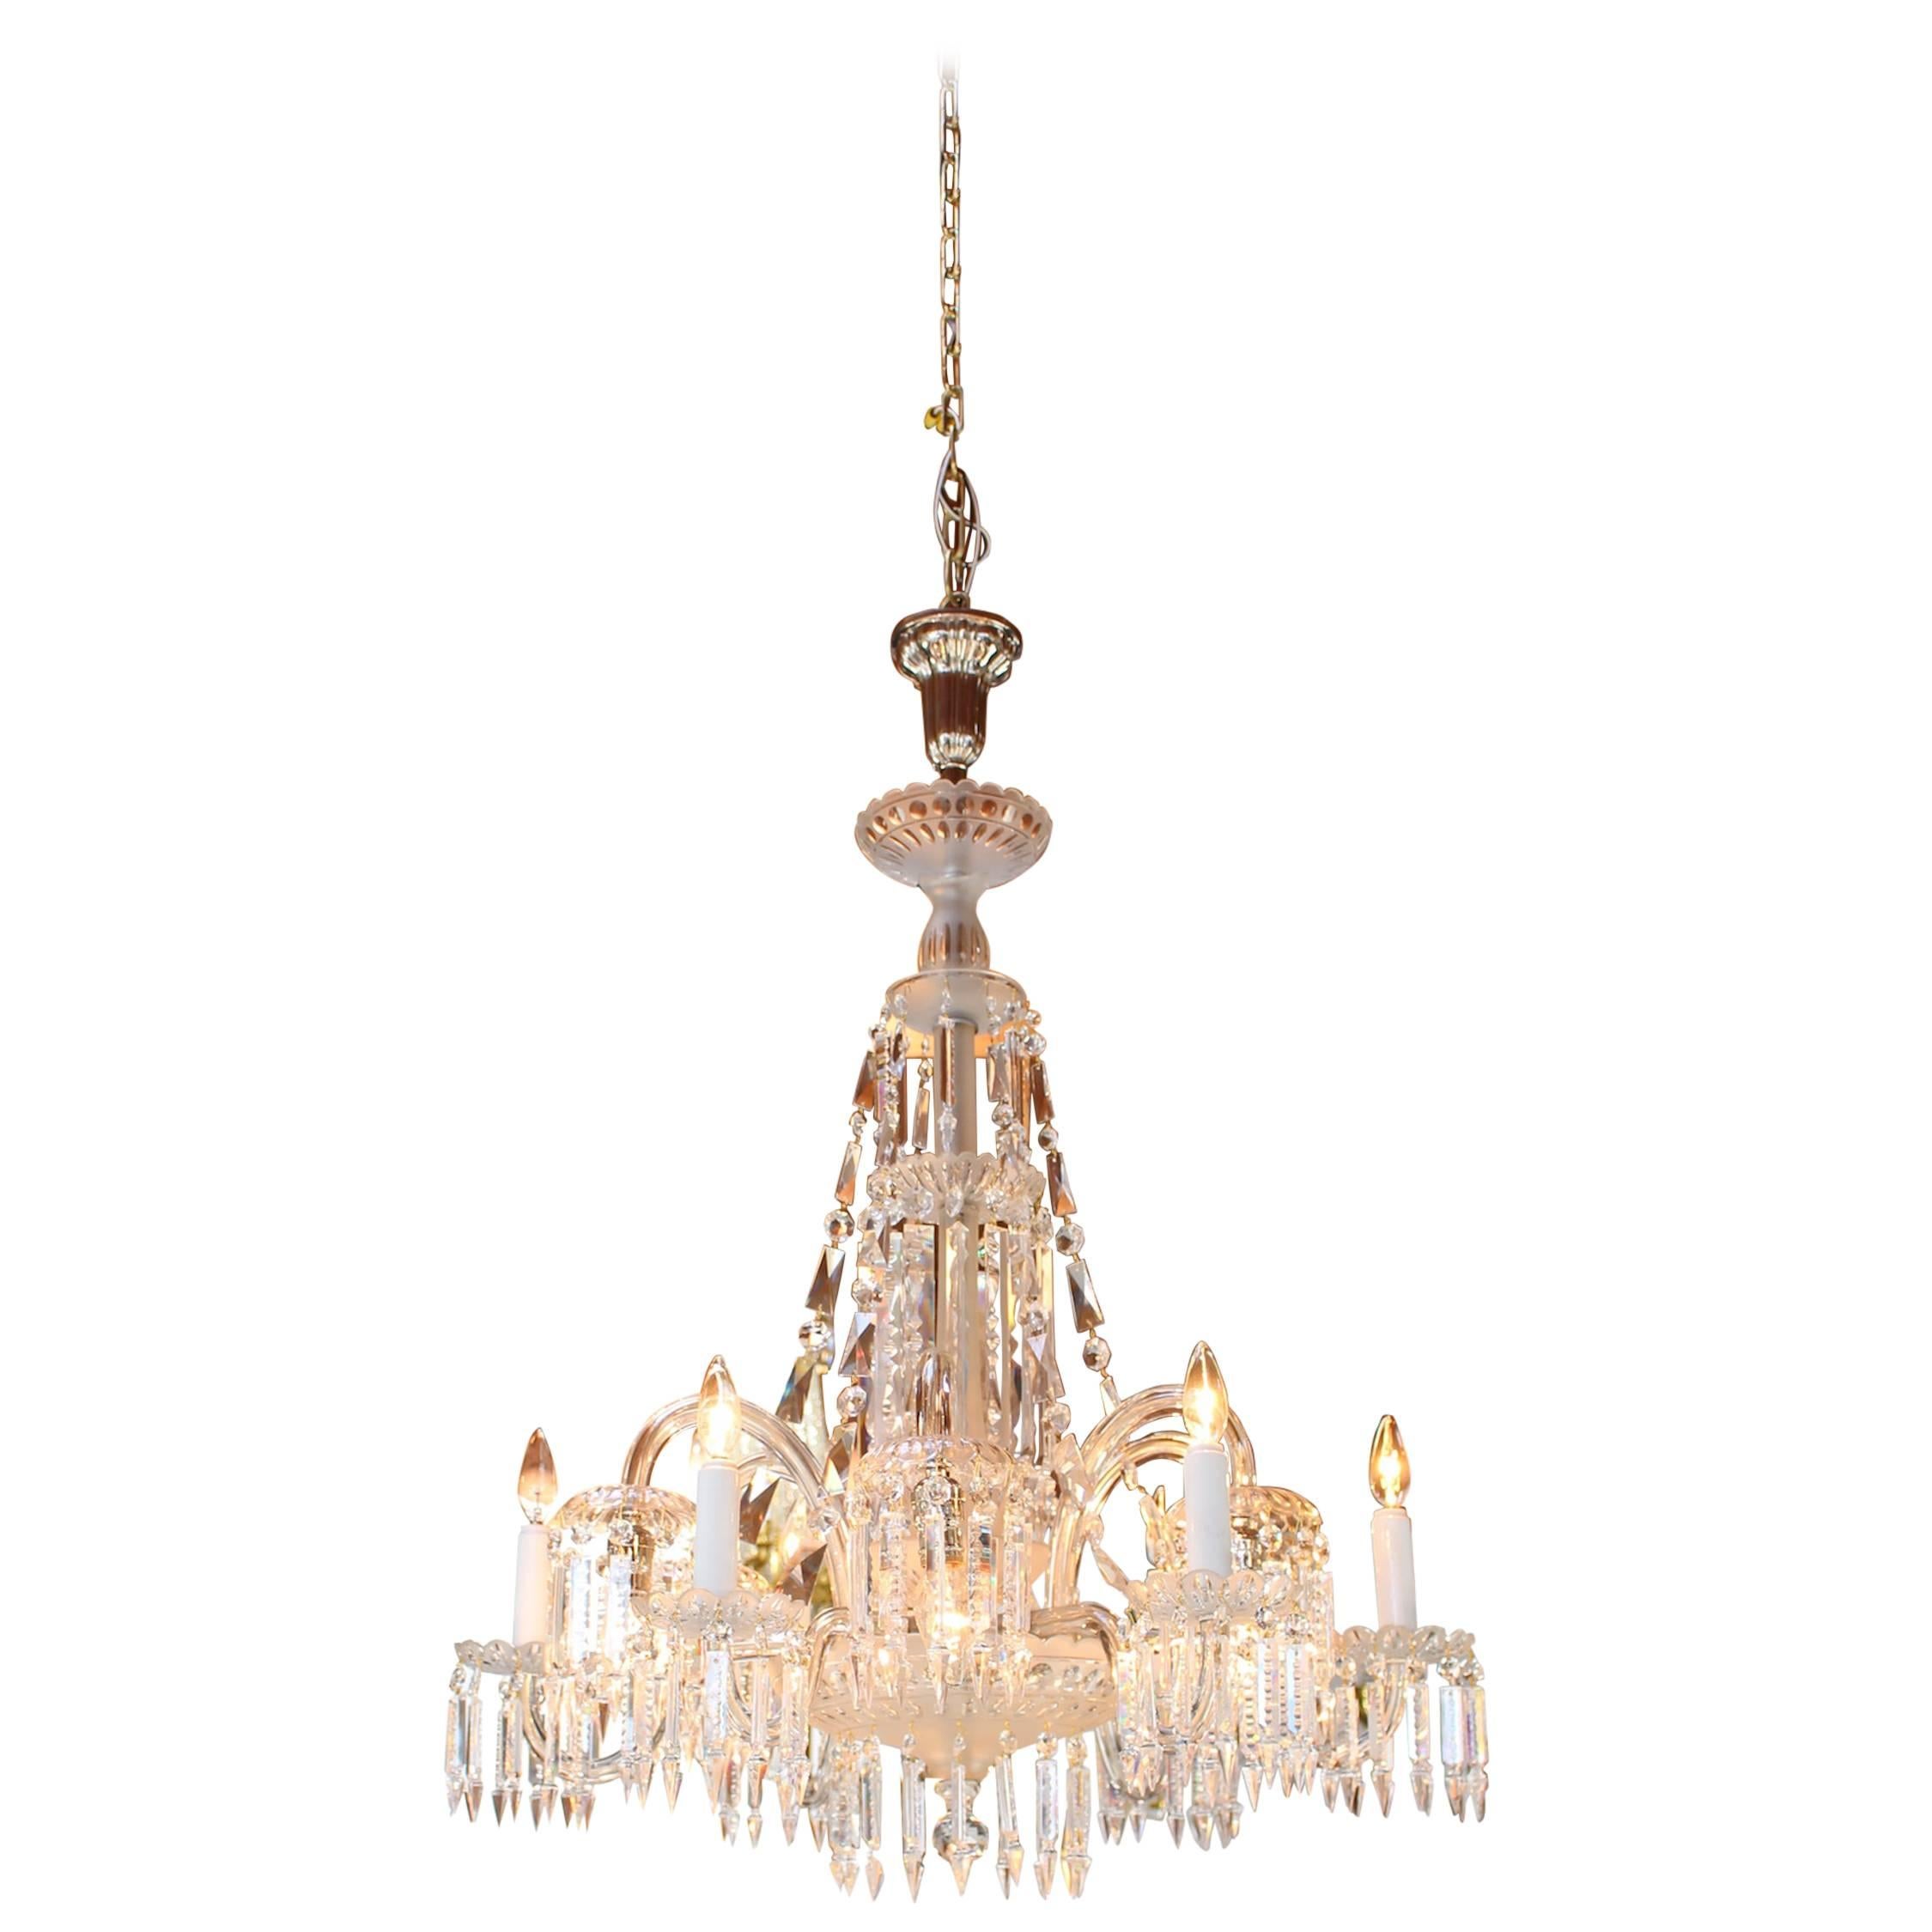 Mitchell Vance Combination Gas-Electric Crystal Chandelier, circa 1900 For Sale